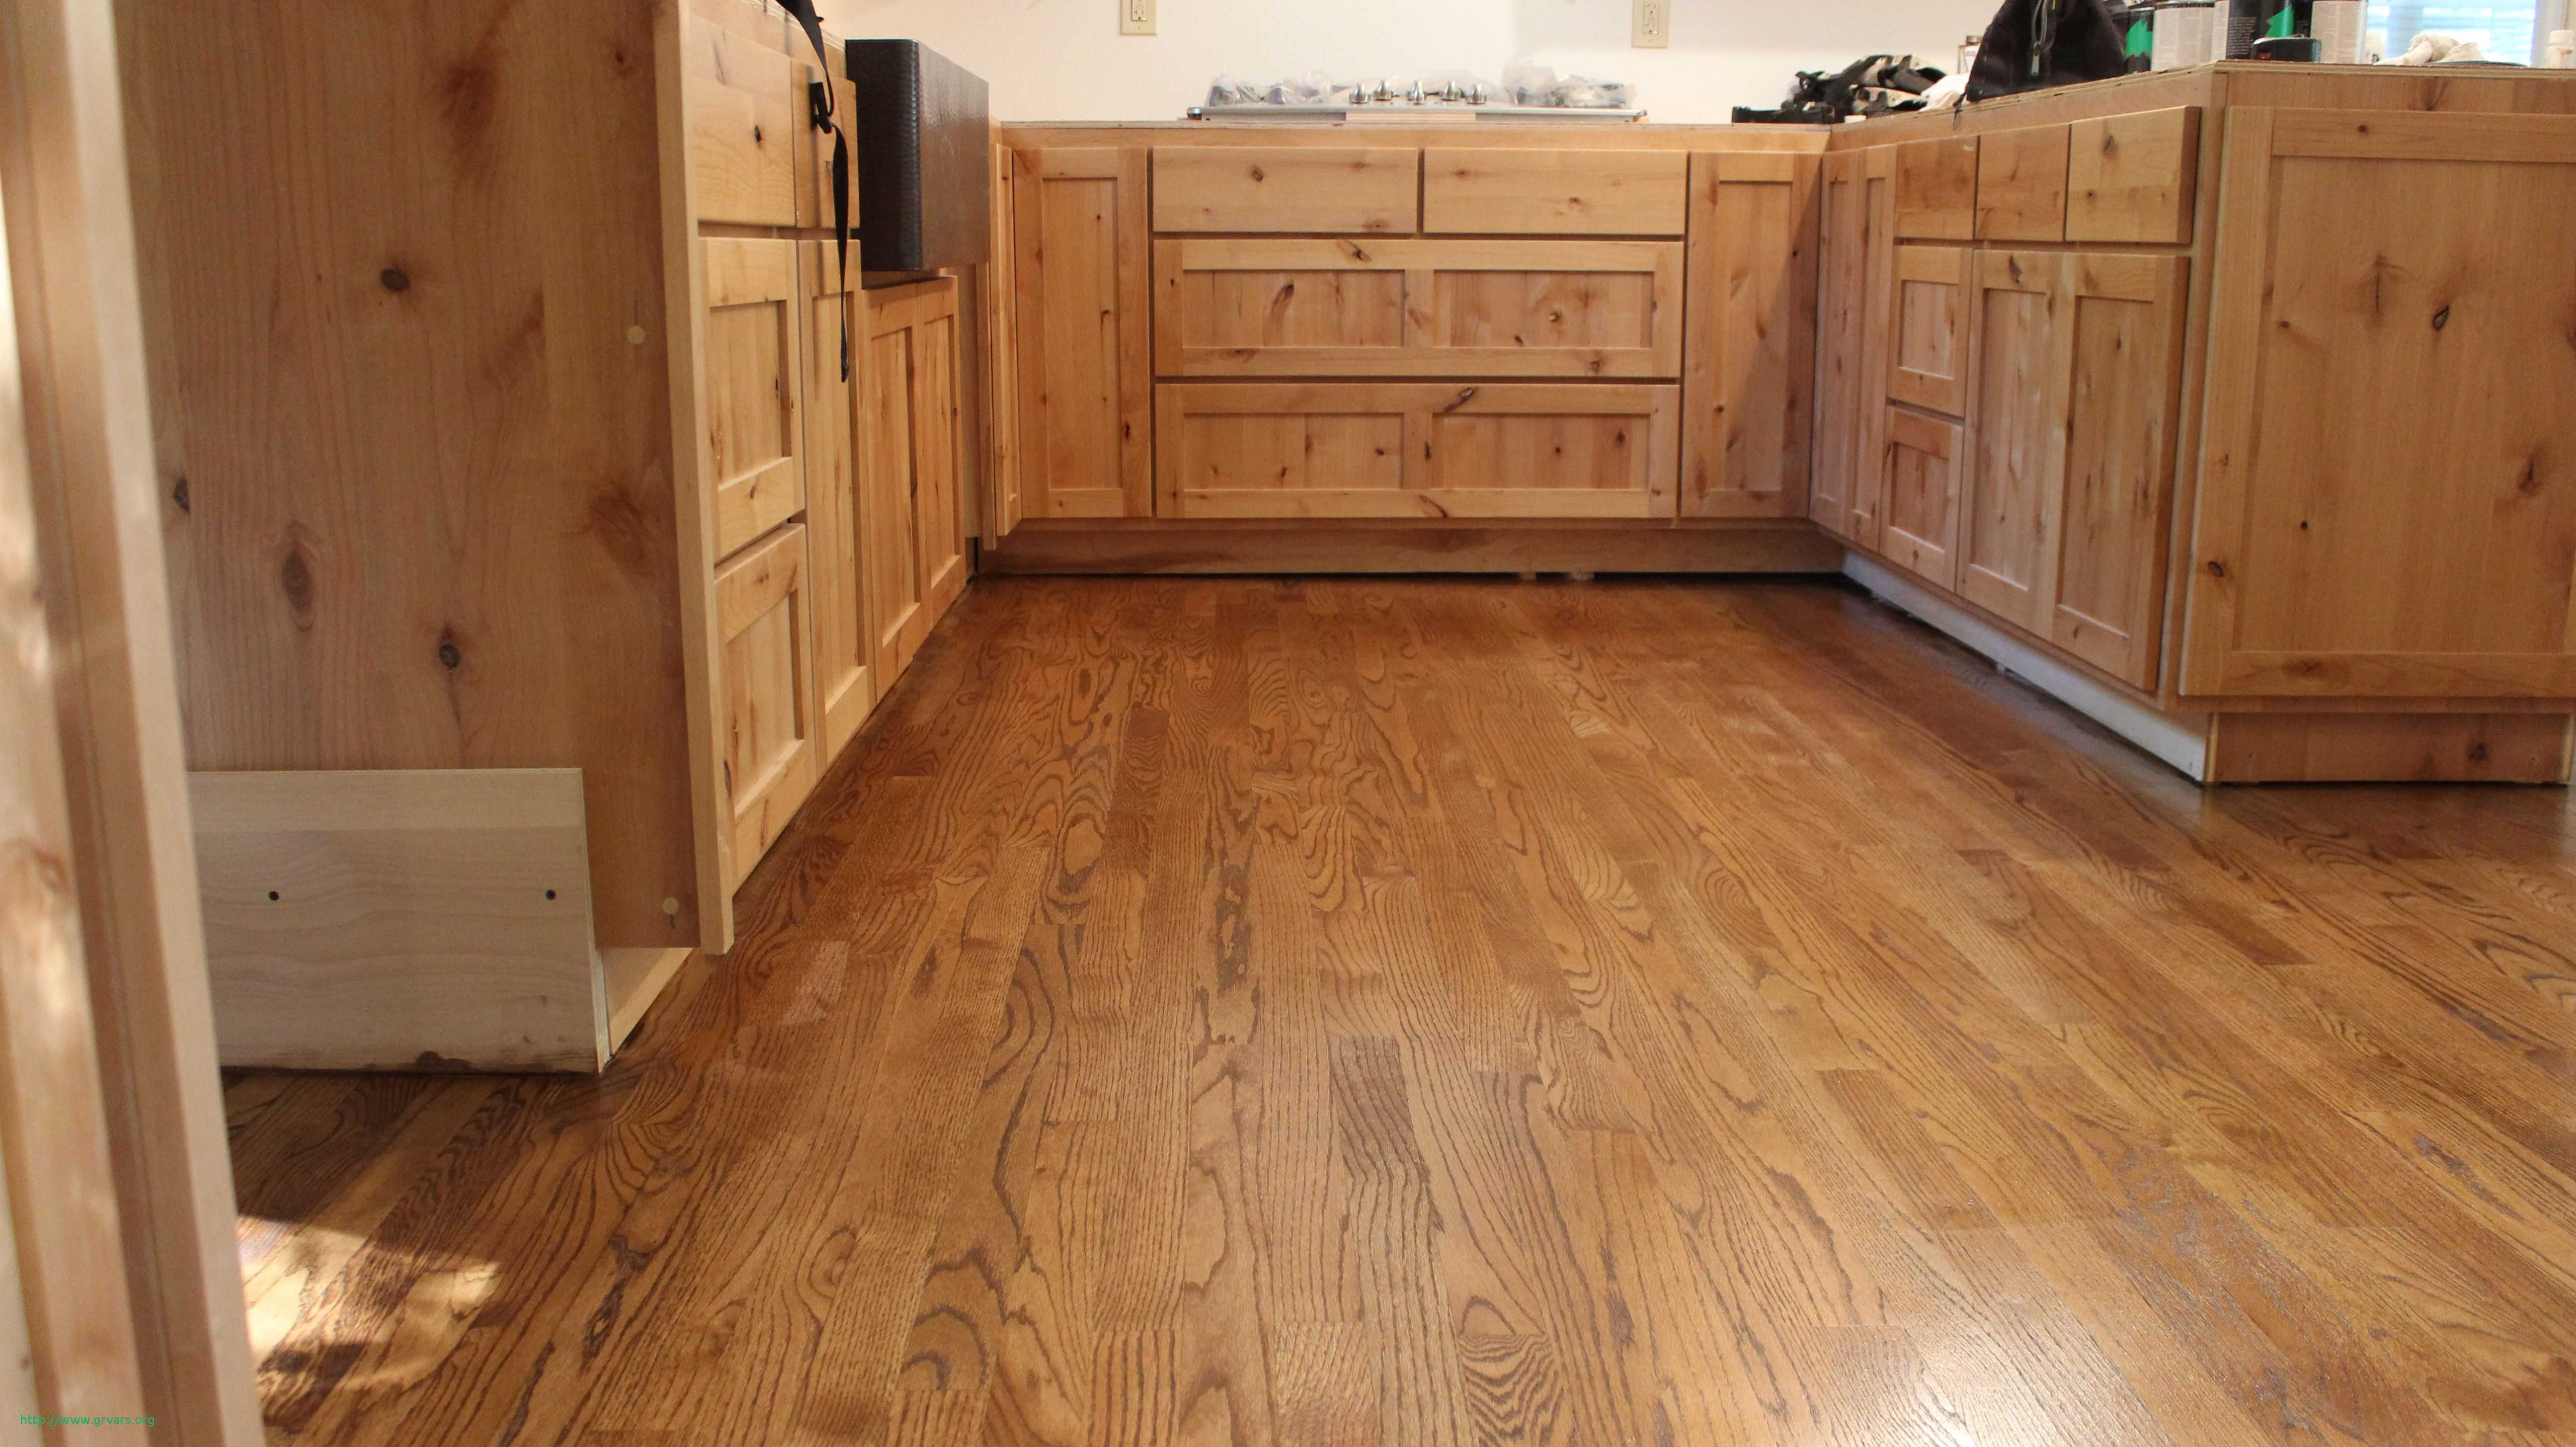 washington dc hardwood flooring of 15 charmant how to seal a hardwood floor ideas blog with regard to dura seal provincial stain the floor is red oak the floor was water popped prior to